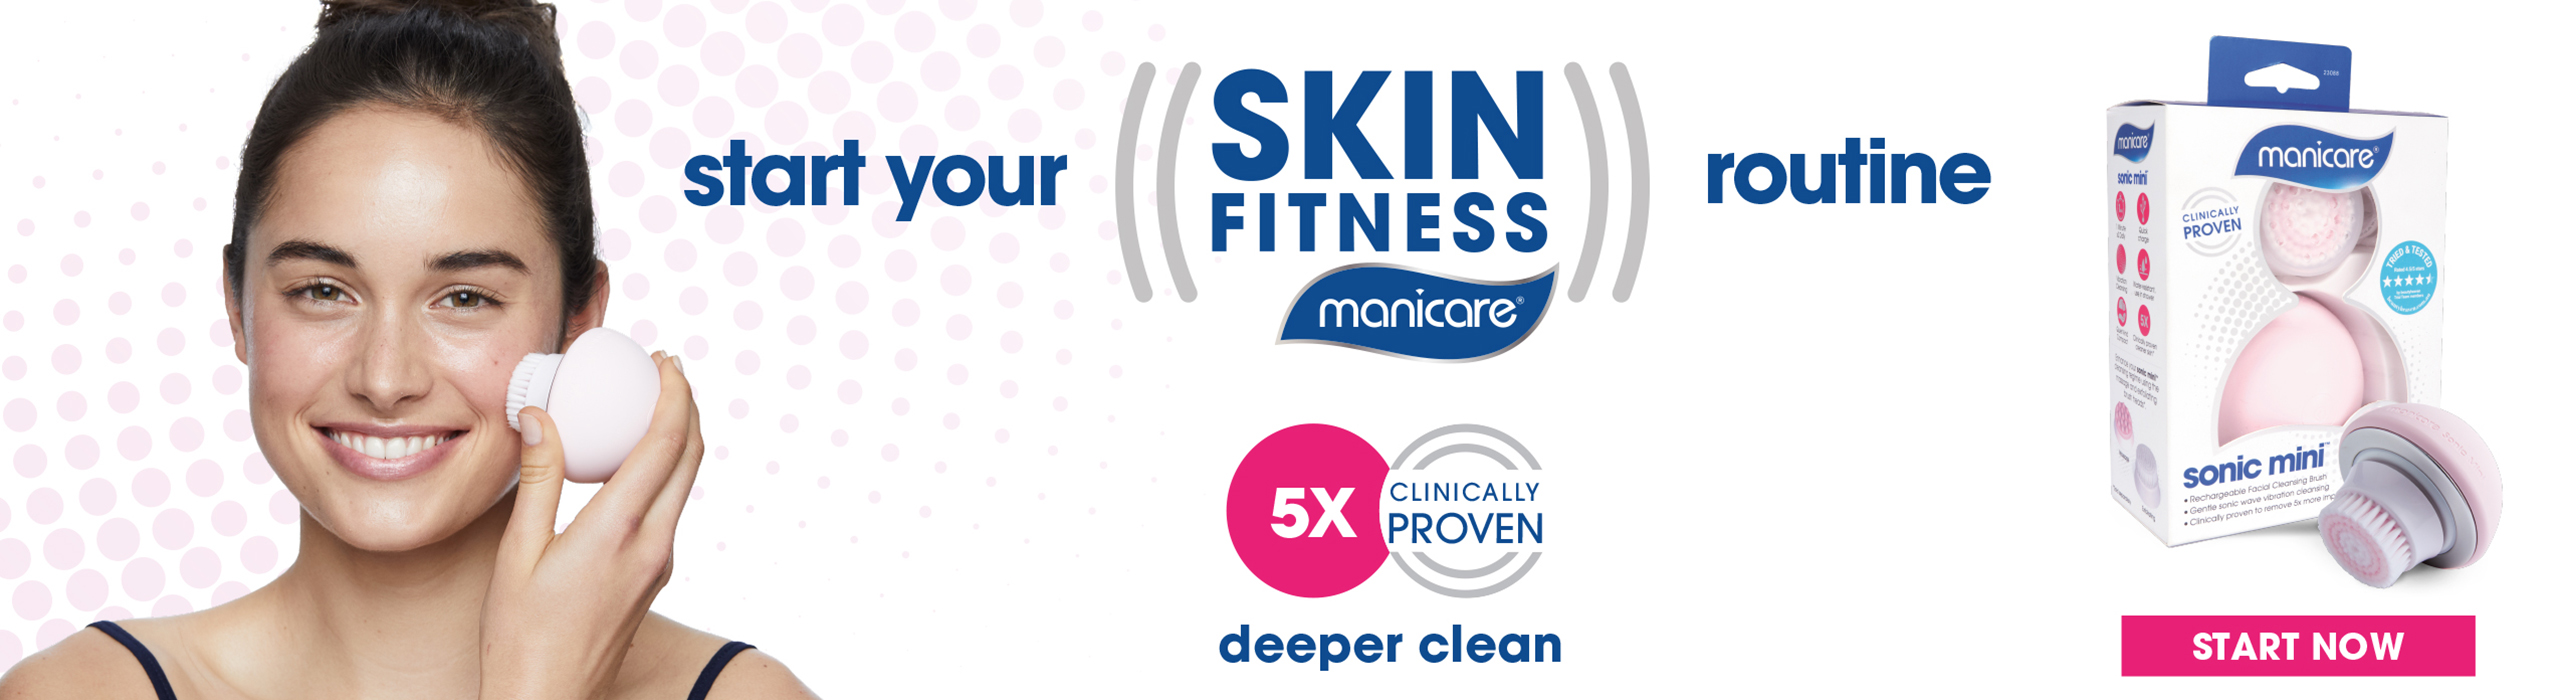 Get skin fit. Gentle sonic wave vibration cleansing. Clinically proven to remove 5x more impurities.